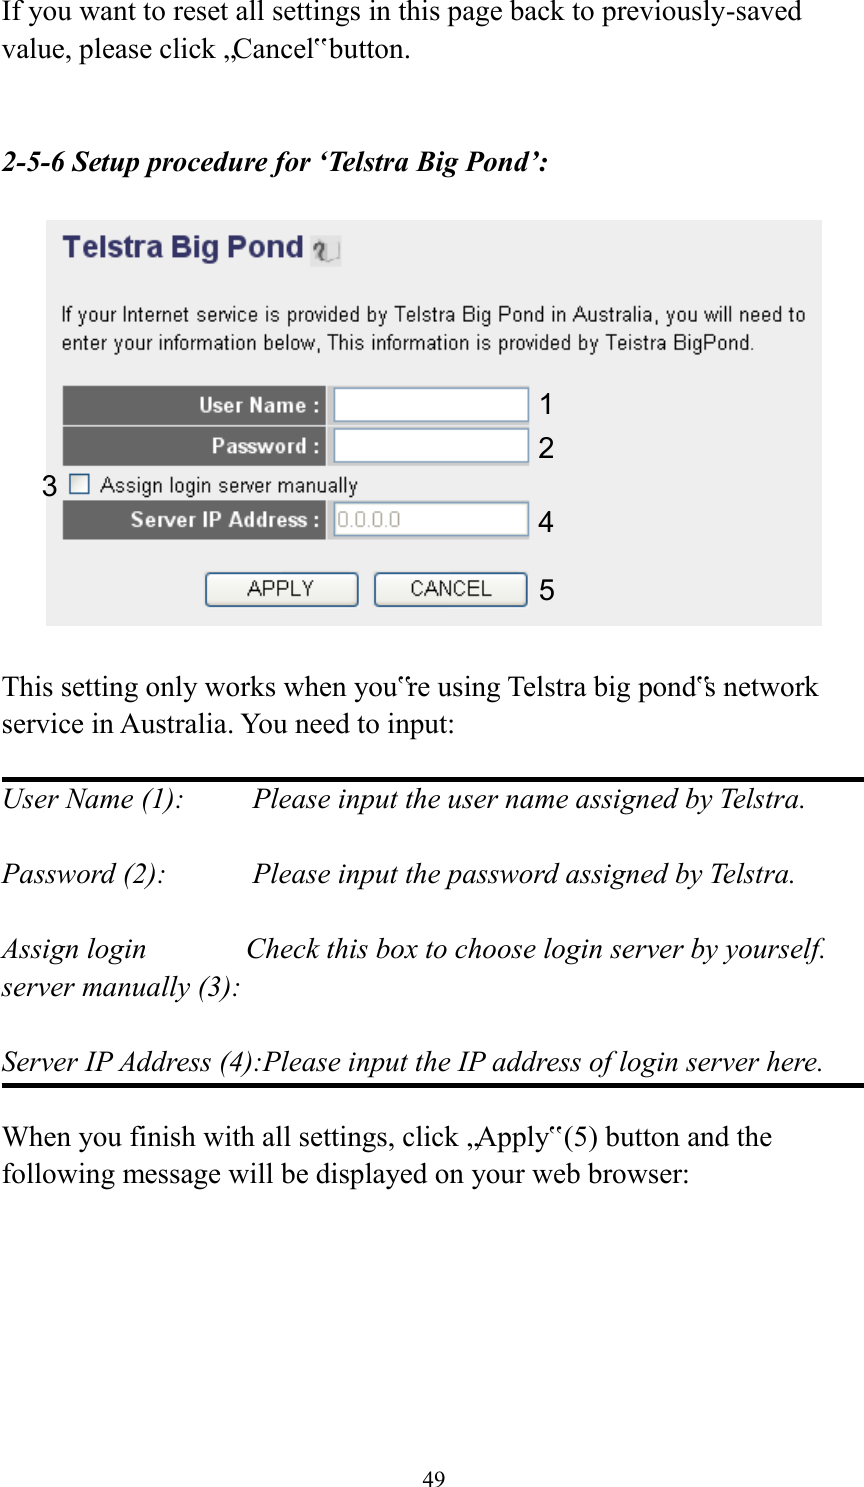  49 If you want to reset all settings in this page back to previously-saved value, please click „Cancel‟ button.   2-5-6 Setup procedure for ‘Telstra Big Pond’:    This setting only works when you‟re using Telstra big pond‟s network service in Australia. You need to input:  User Name (1):     Please input the user name assigned by Telstra.  Password (2):      Please input the password assigned by Telstra.  Assign login       Check this box to choose login server by yourself. server manually (3):    Server IP Address (4):Please input the IP address of login server here.  When you finish with all settings, click „Apply‟ (5) button and the following message will be displayed on your web browser:  1 2 3 4 5 